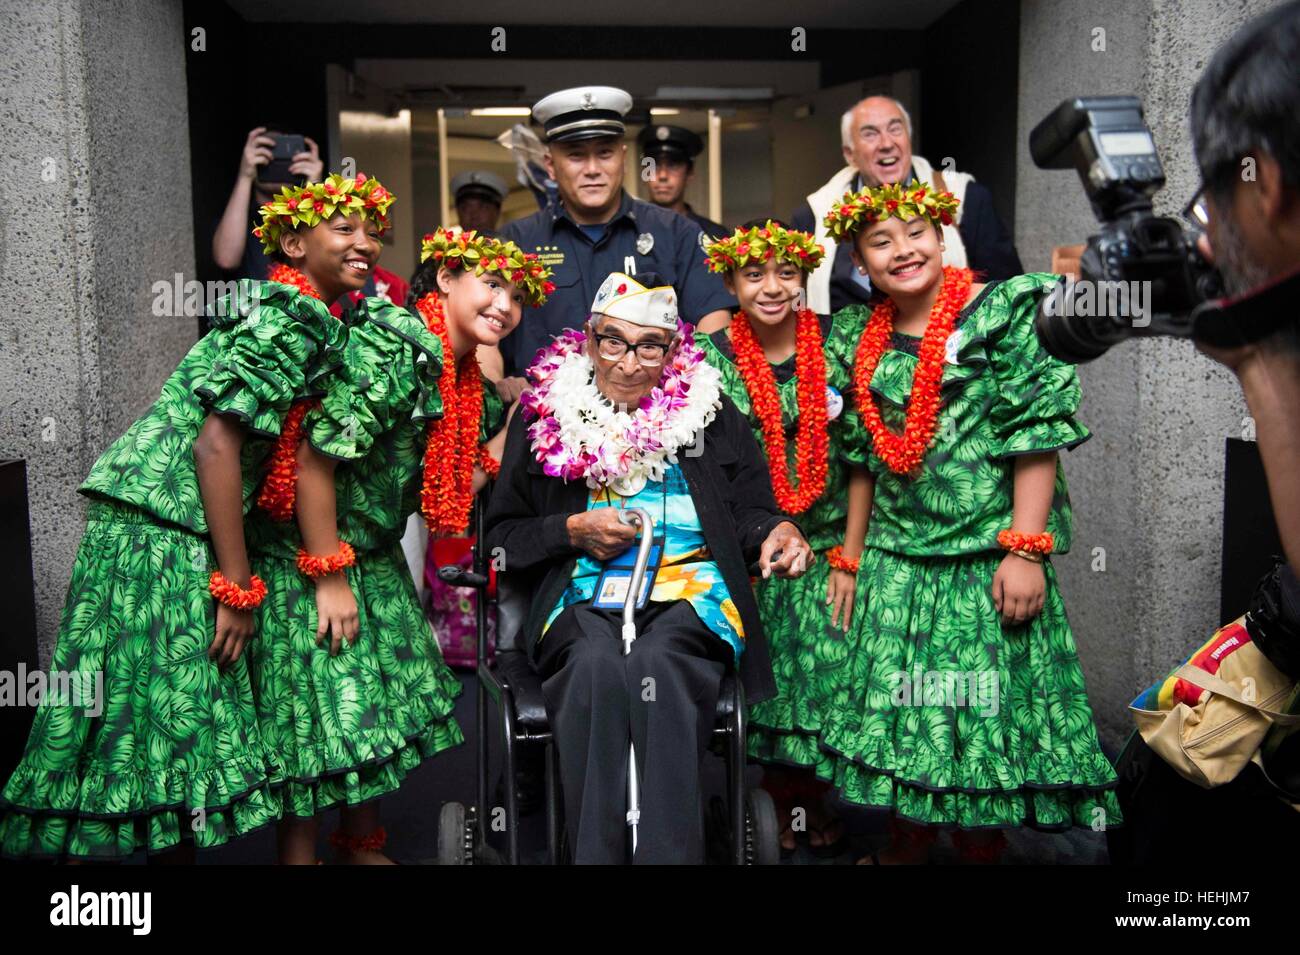 Oldest surviving World War II Pearl Harbor U.S. veteran, 104-year-old Ray Chavez, is greeted by local Hawaiian children with floral leis after arriving at the Honolulu International Airport to participate in commemoration events to honoring the 75th anniversary of the Pearl Harbor attacks December 3, 2016 in Honolulu, Hawaii. Stock Photo